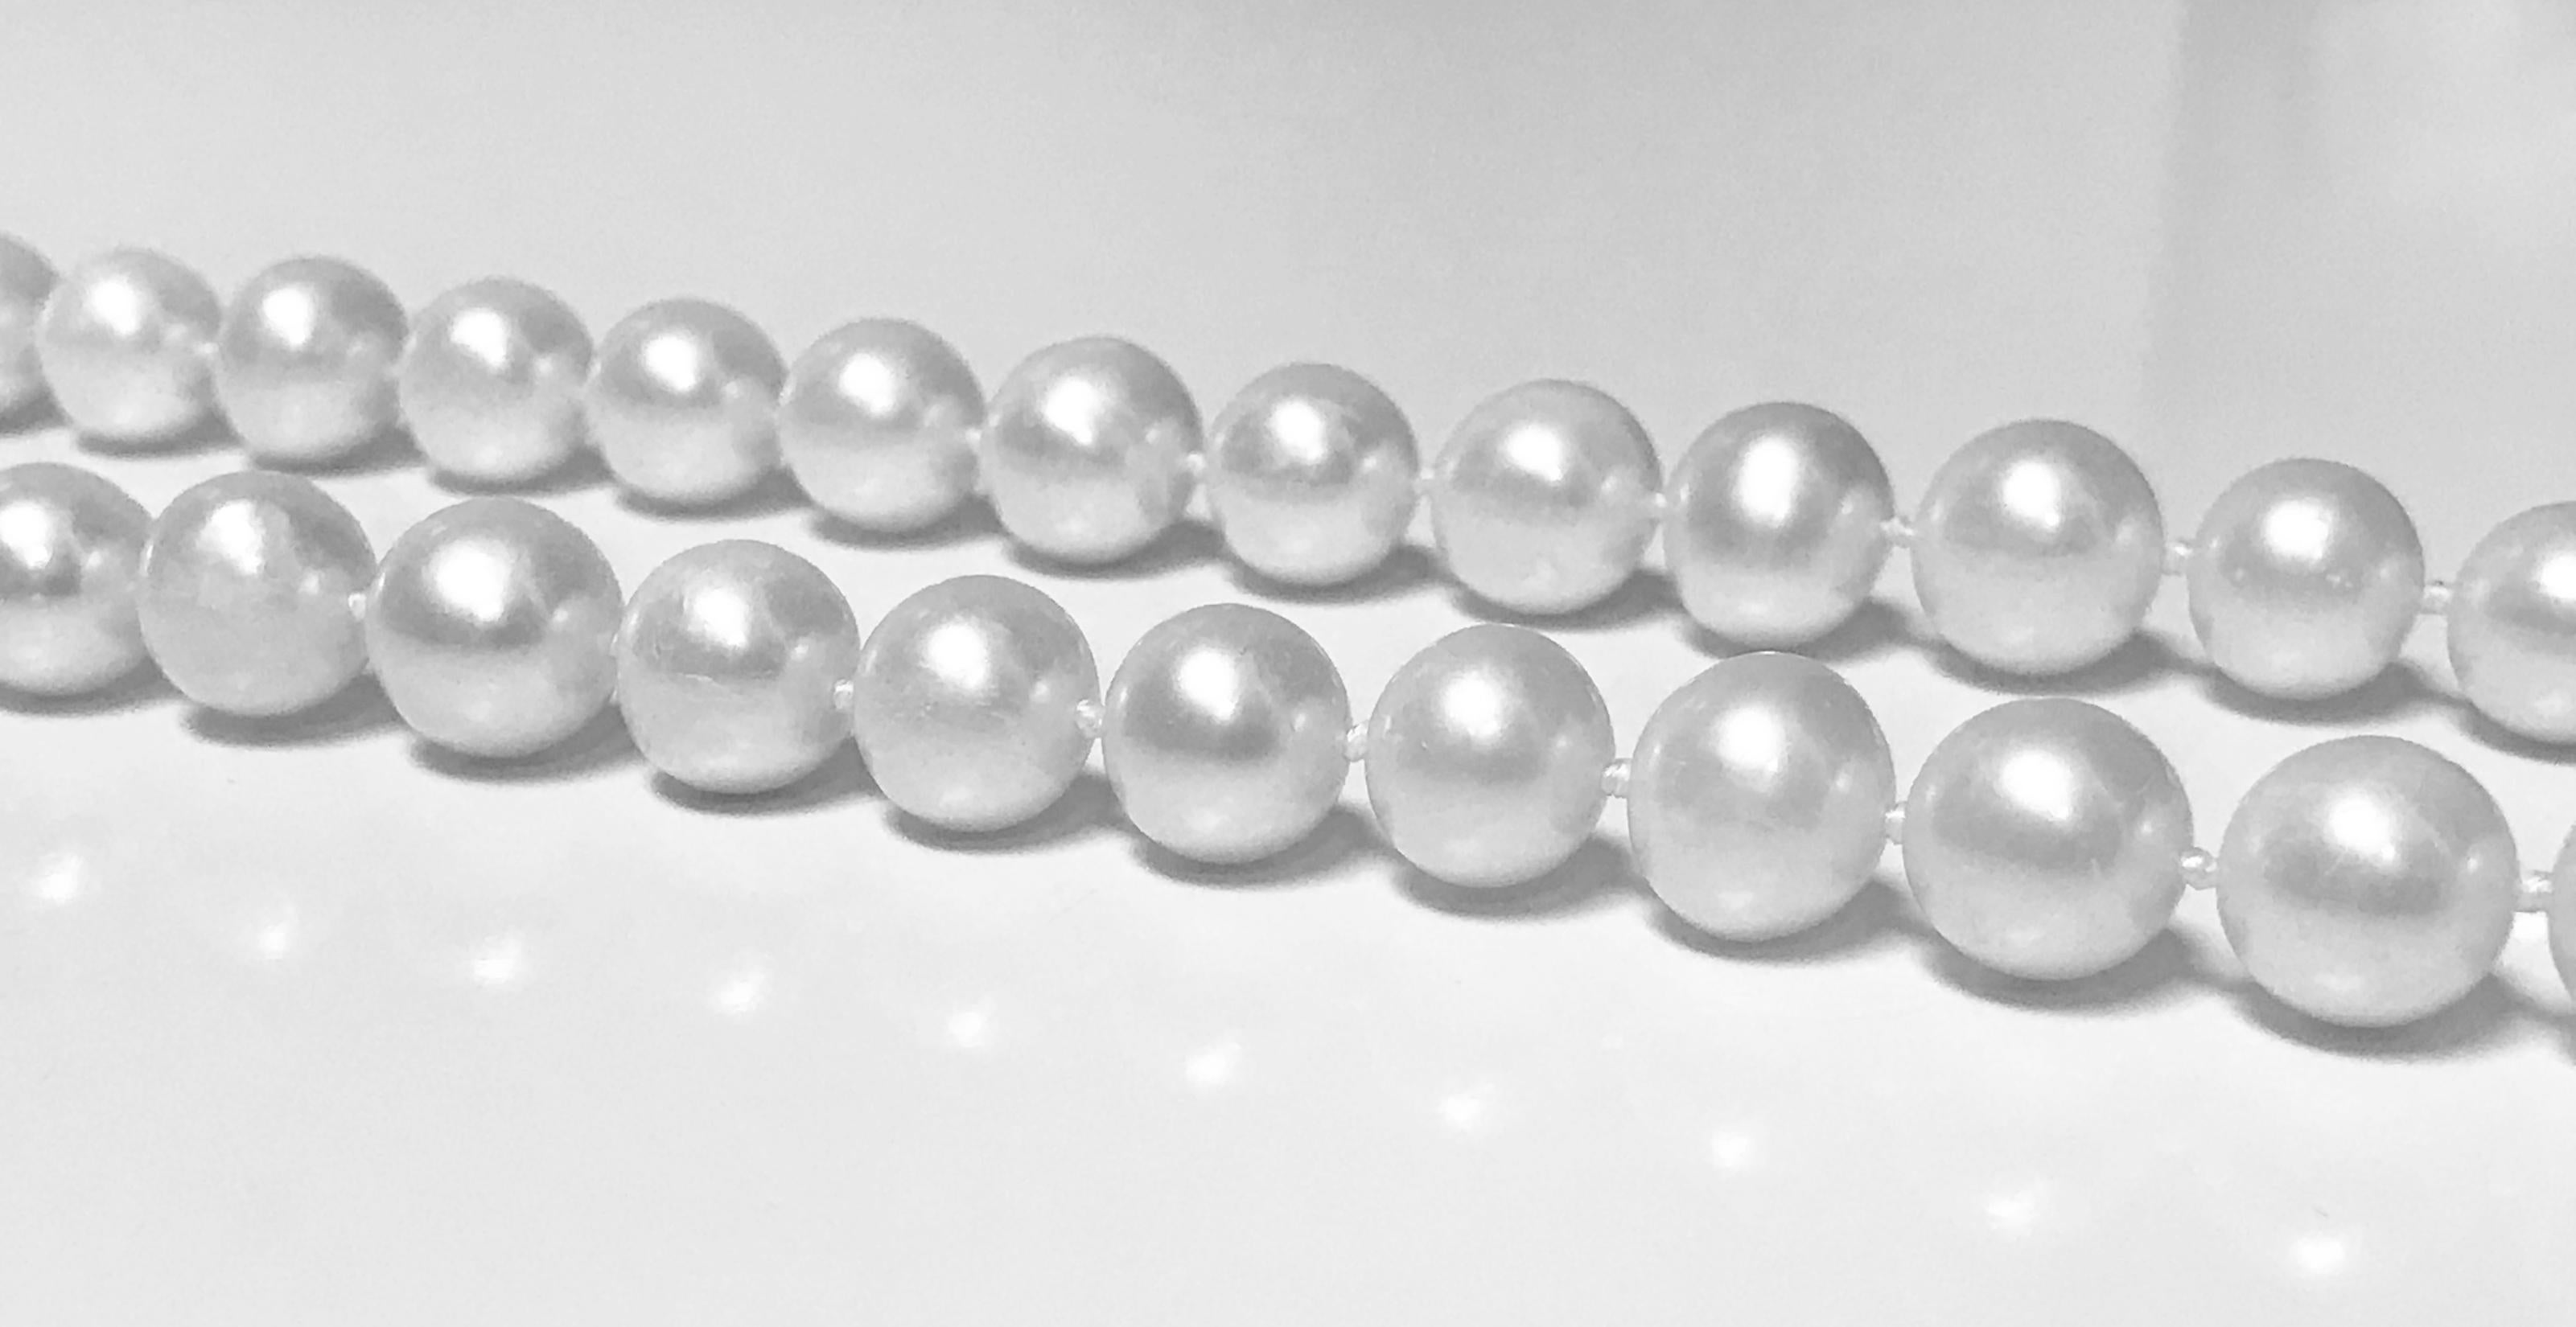 42 inch Strand of Cultured Fresh Water Pearl Necklace comprising 89 well matched slightly off round cultured pearls gauging approximately 10.00 - 11.50 mm, white, medium - high lustre, medium - thick nacre, very slightly blemished, with 14K and